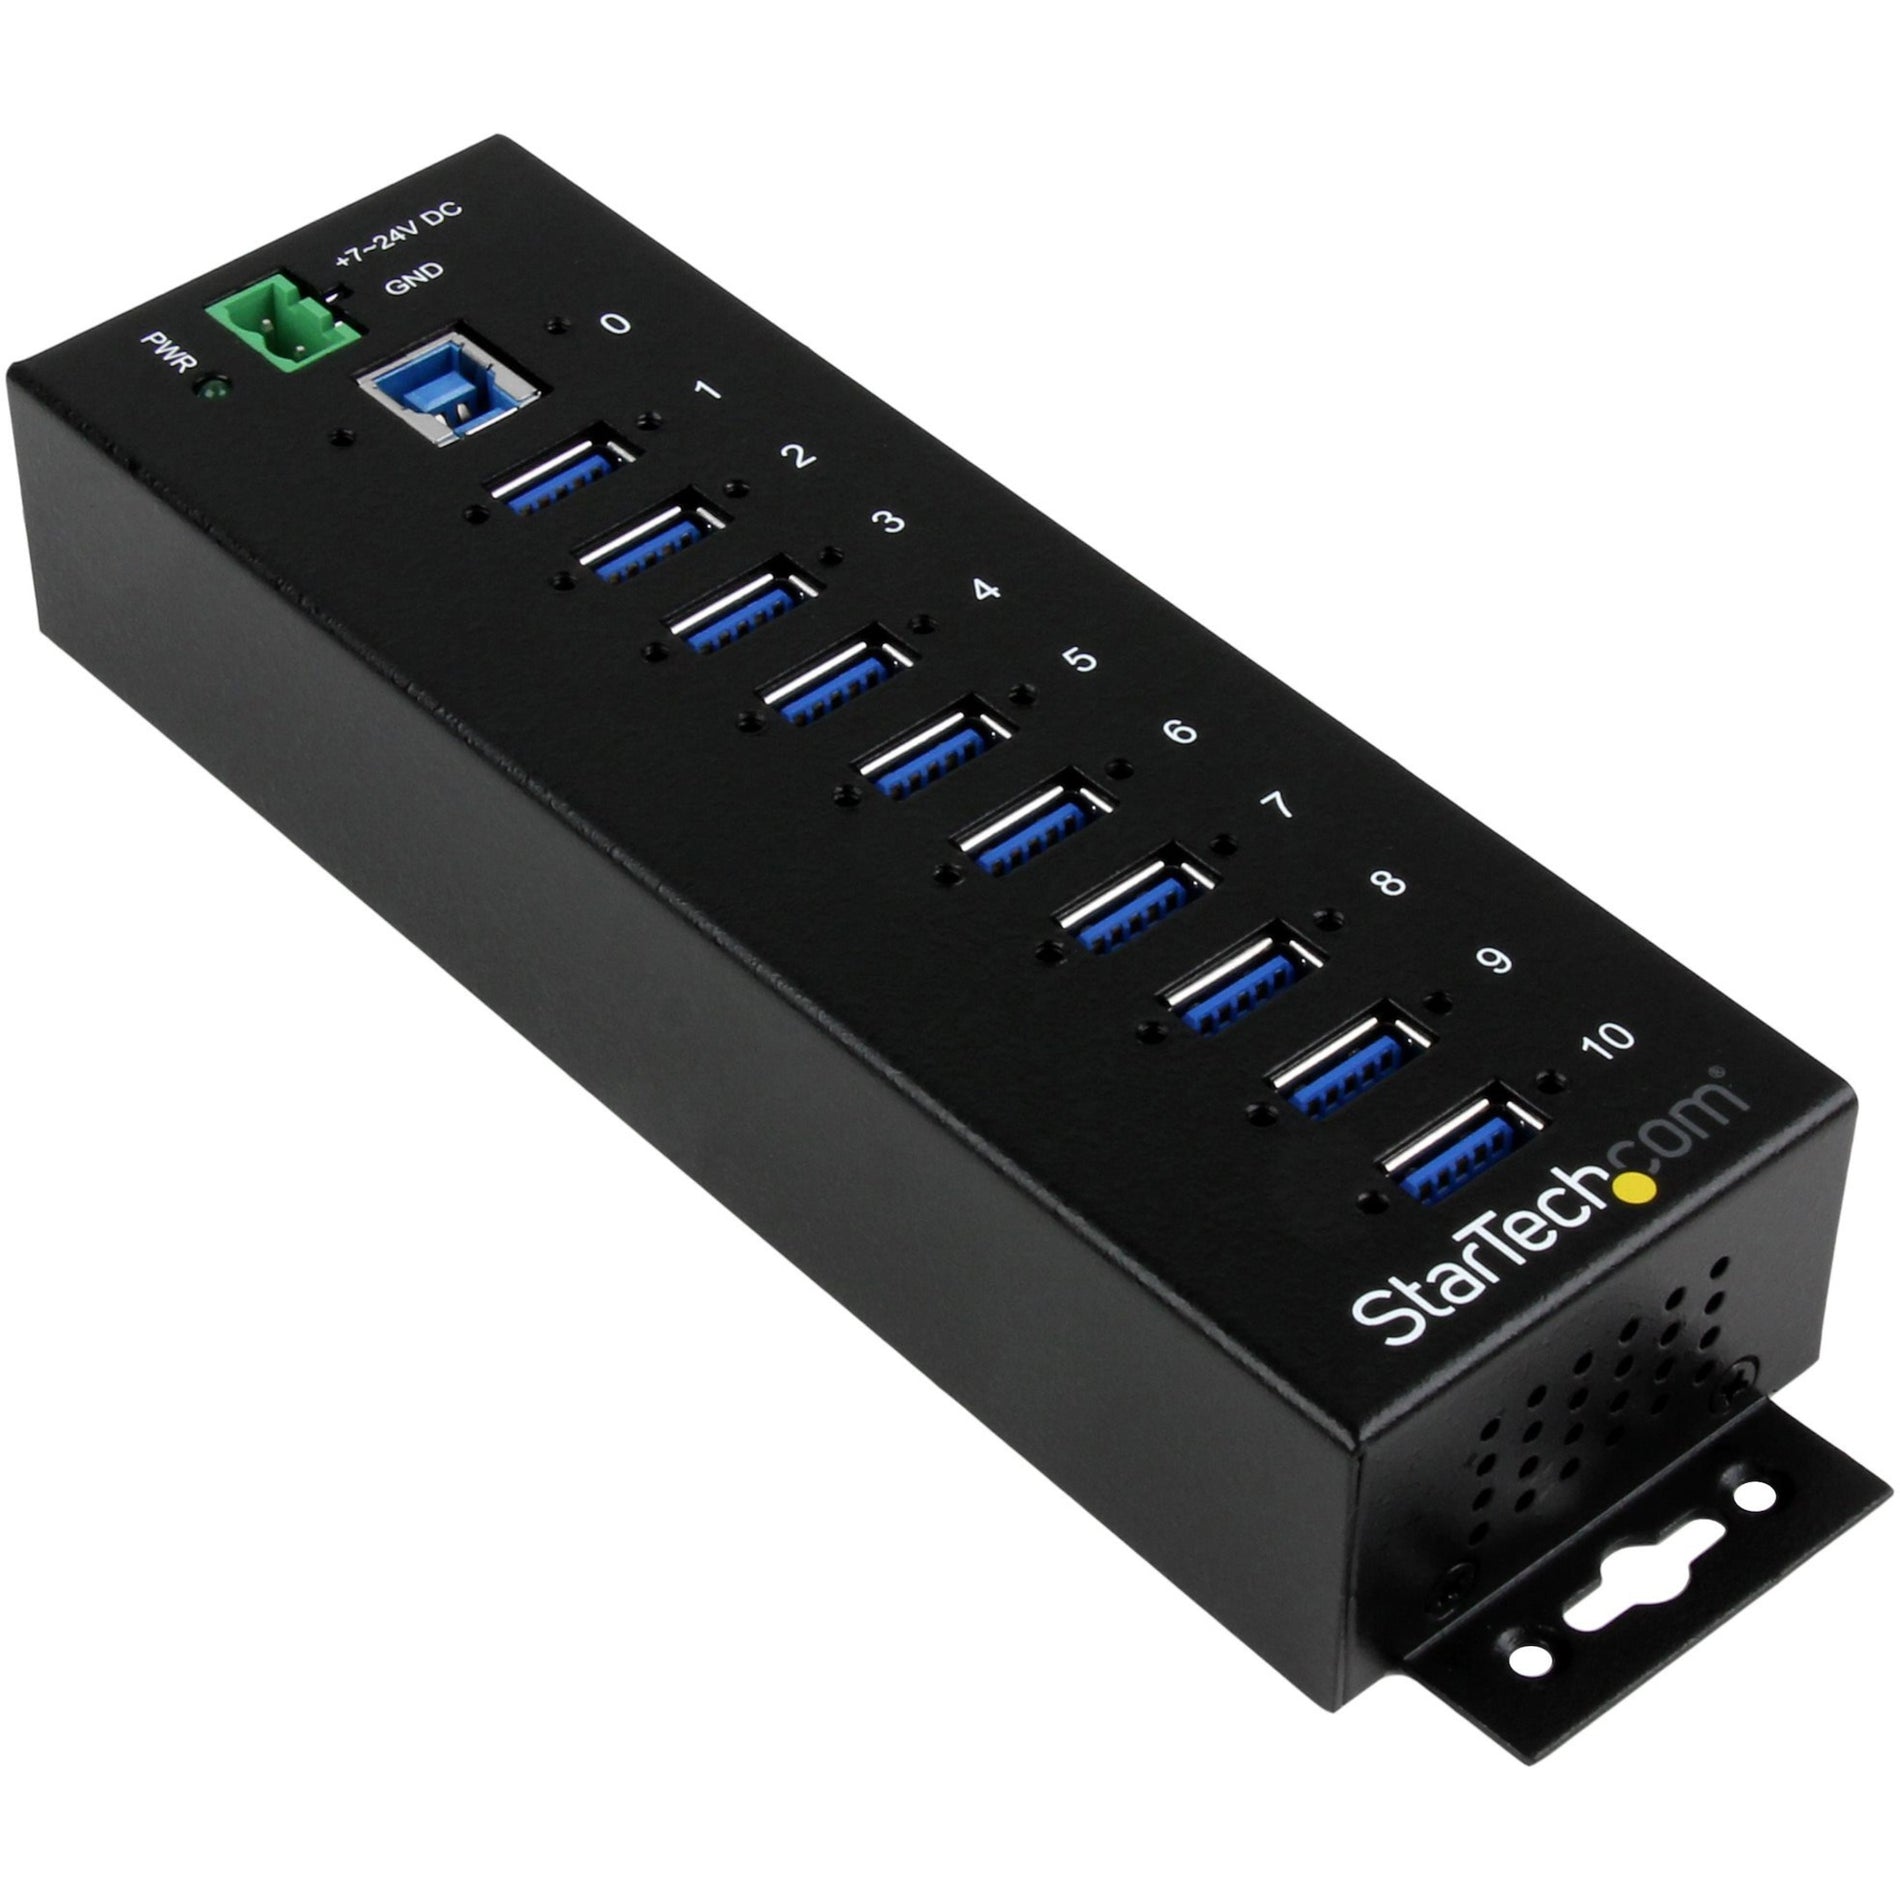 StarTech.com ST1030USBM 10-Port Industrial USB 3.0 Hub, ESD and Surge Protection, DIN Rail or Surface-Mountable Metal Housing